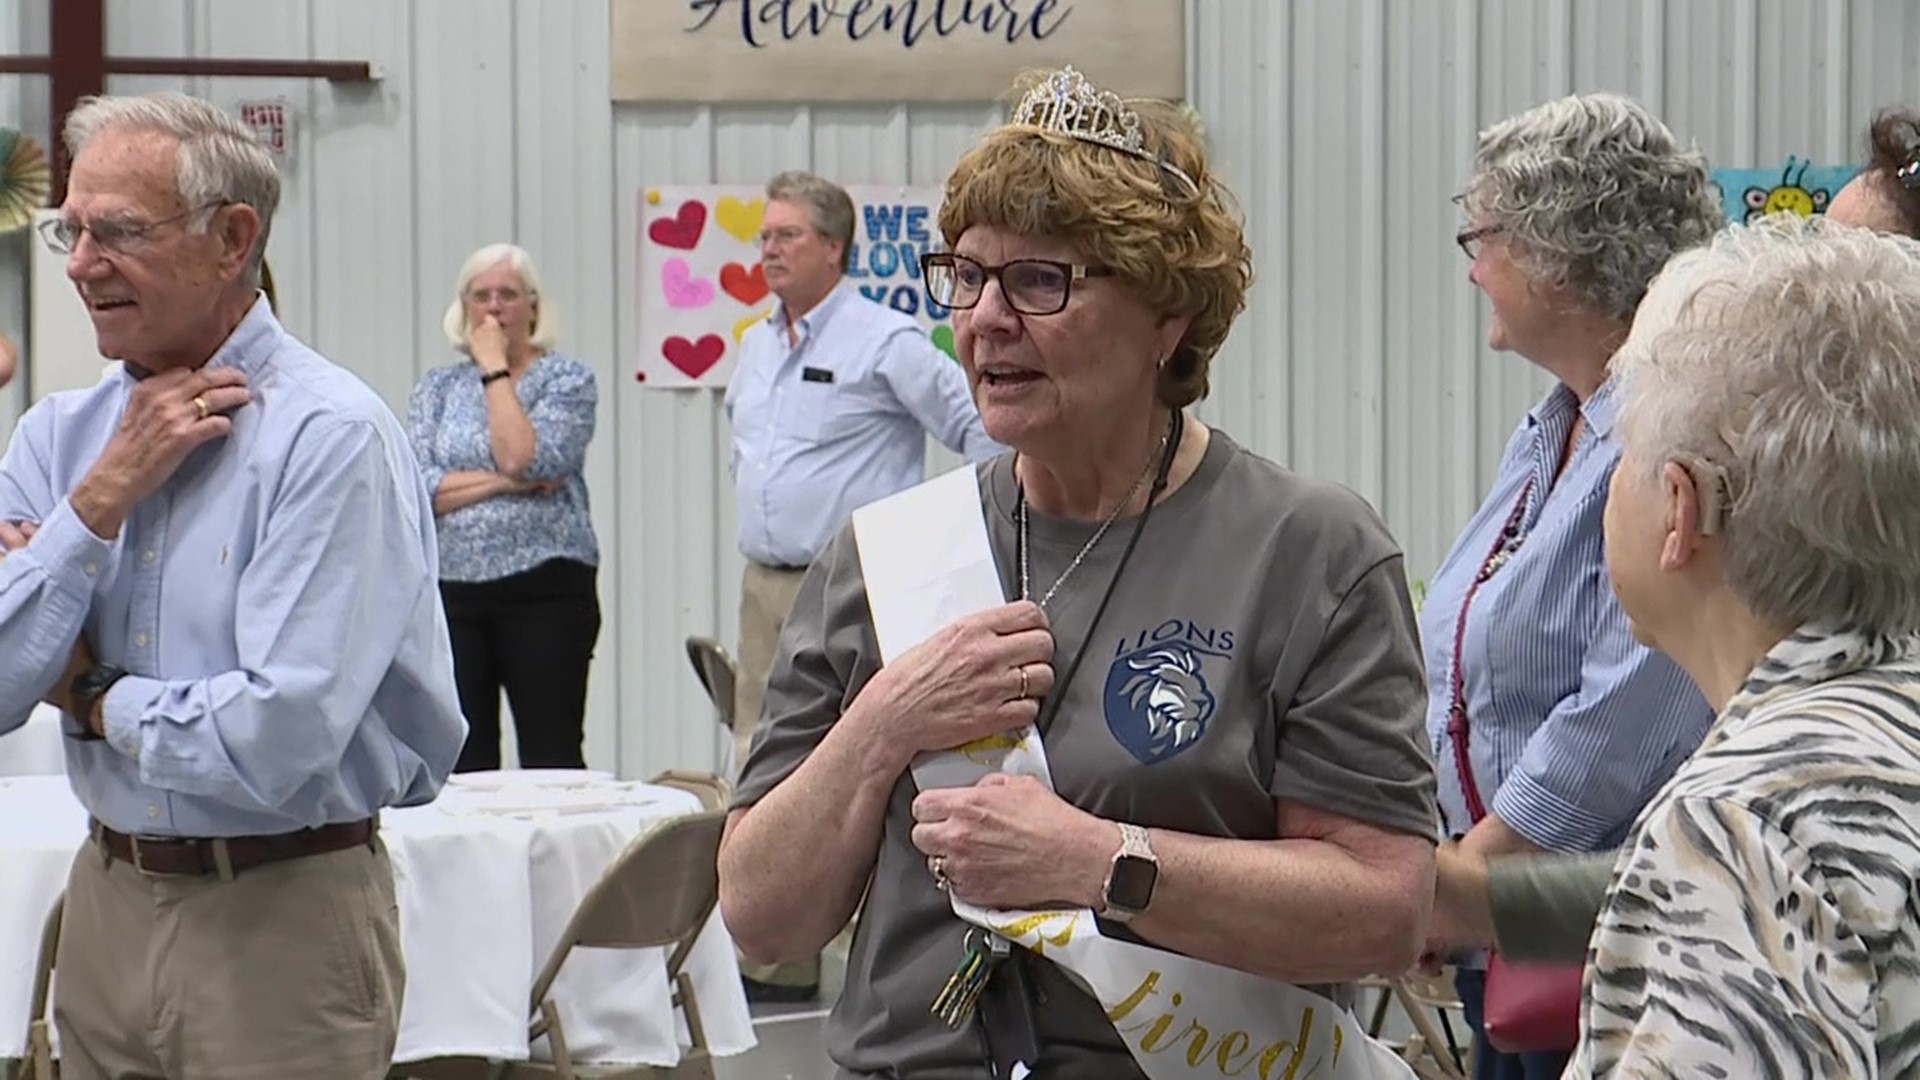 Newswatch 16's Chris Keating was there when they sent her off to retirement with a surprise party.